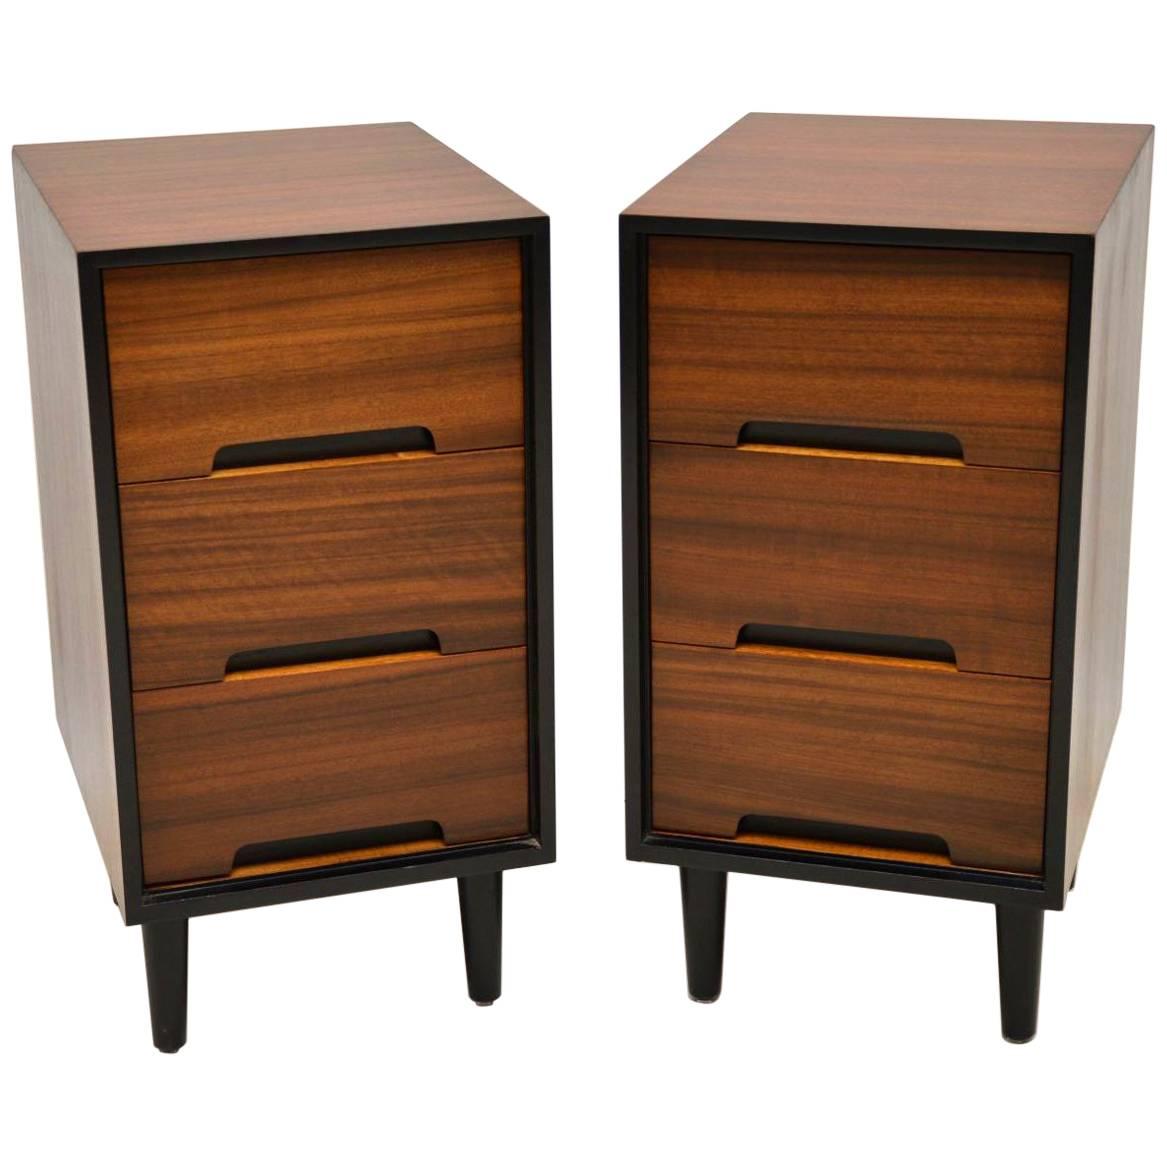 1950s Vintage Pair of Walnut Bedside Chests by John & Sylvia Reid for Stag